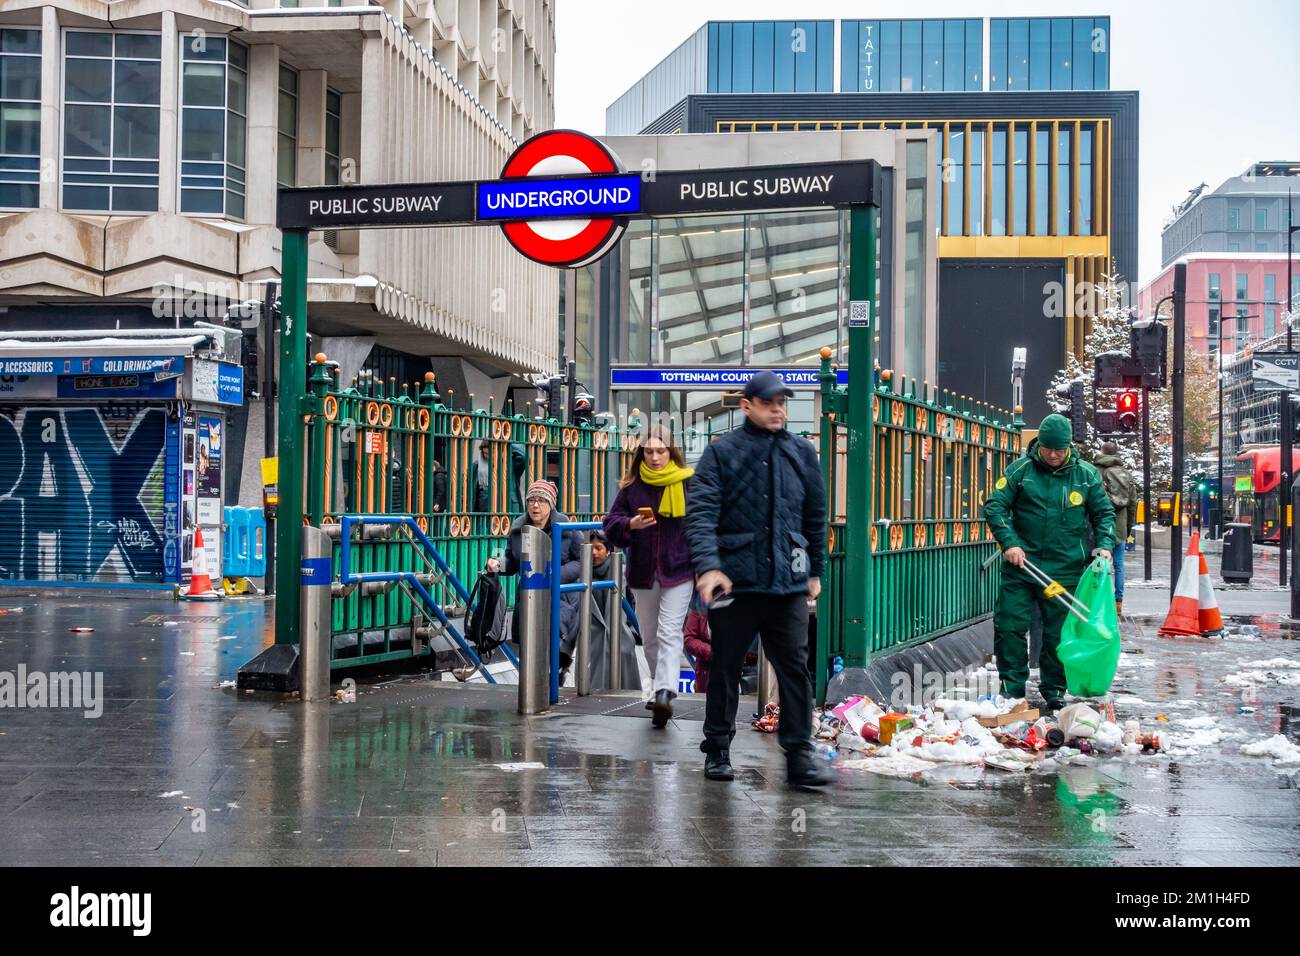 A street cleaner picks up a large pile of rubbish next to an entrance to Tottenham Court Road London Underground Station. Stock Photo